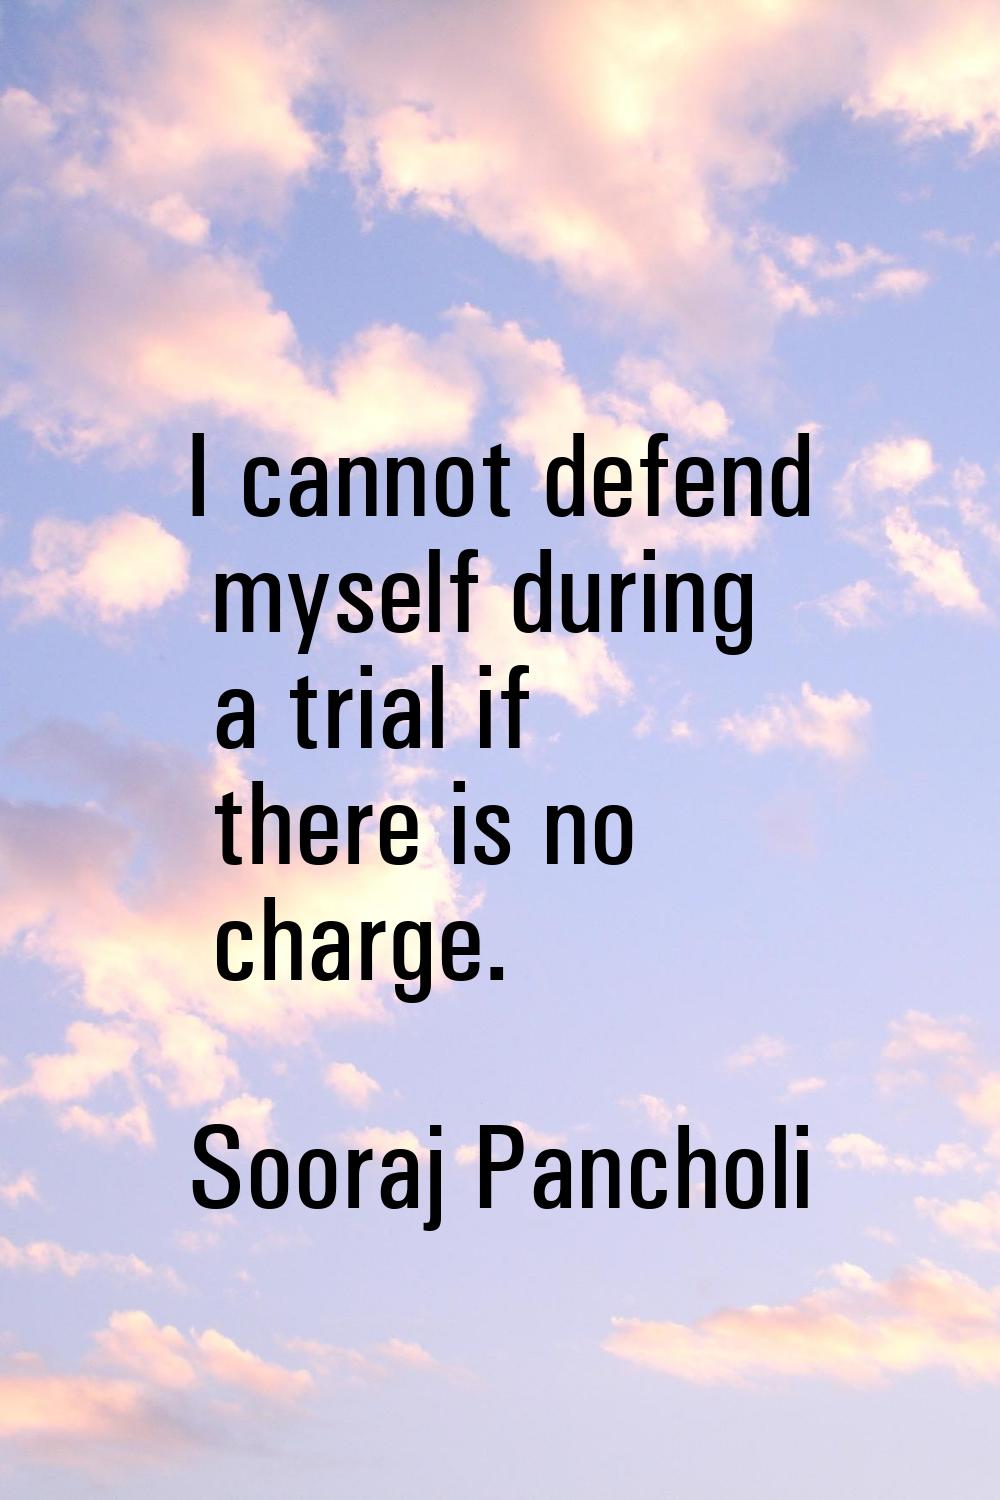 I cannot defend myself during a trial if there is no charge.